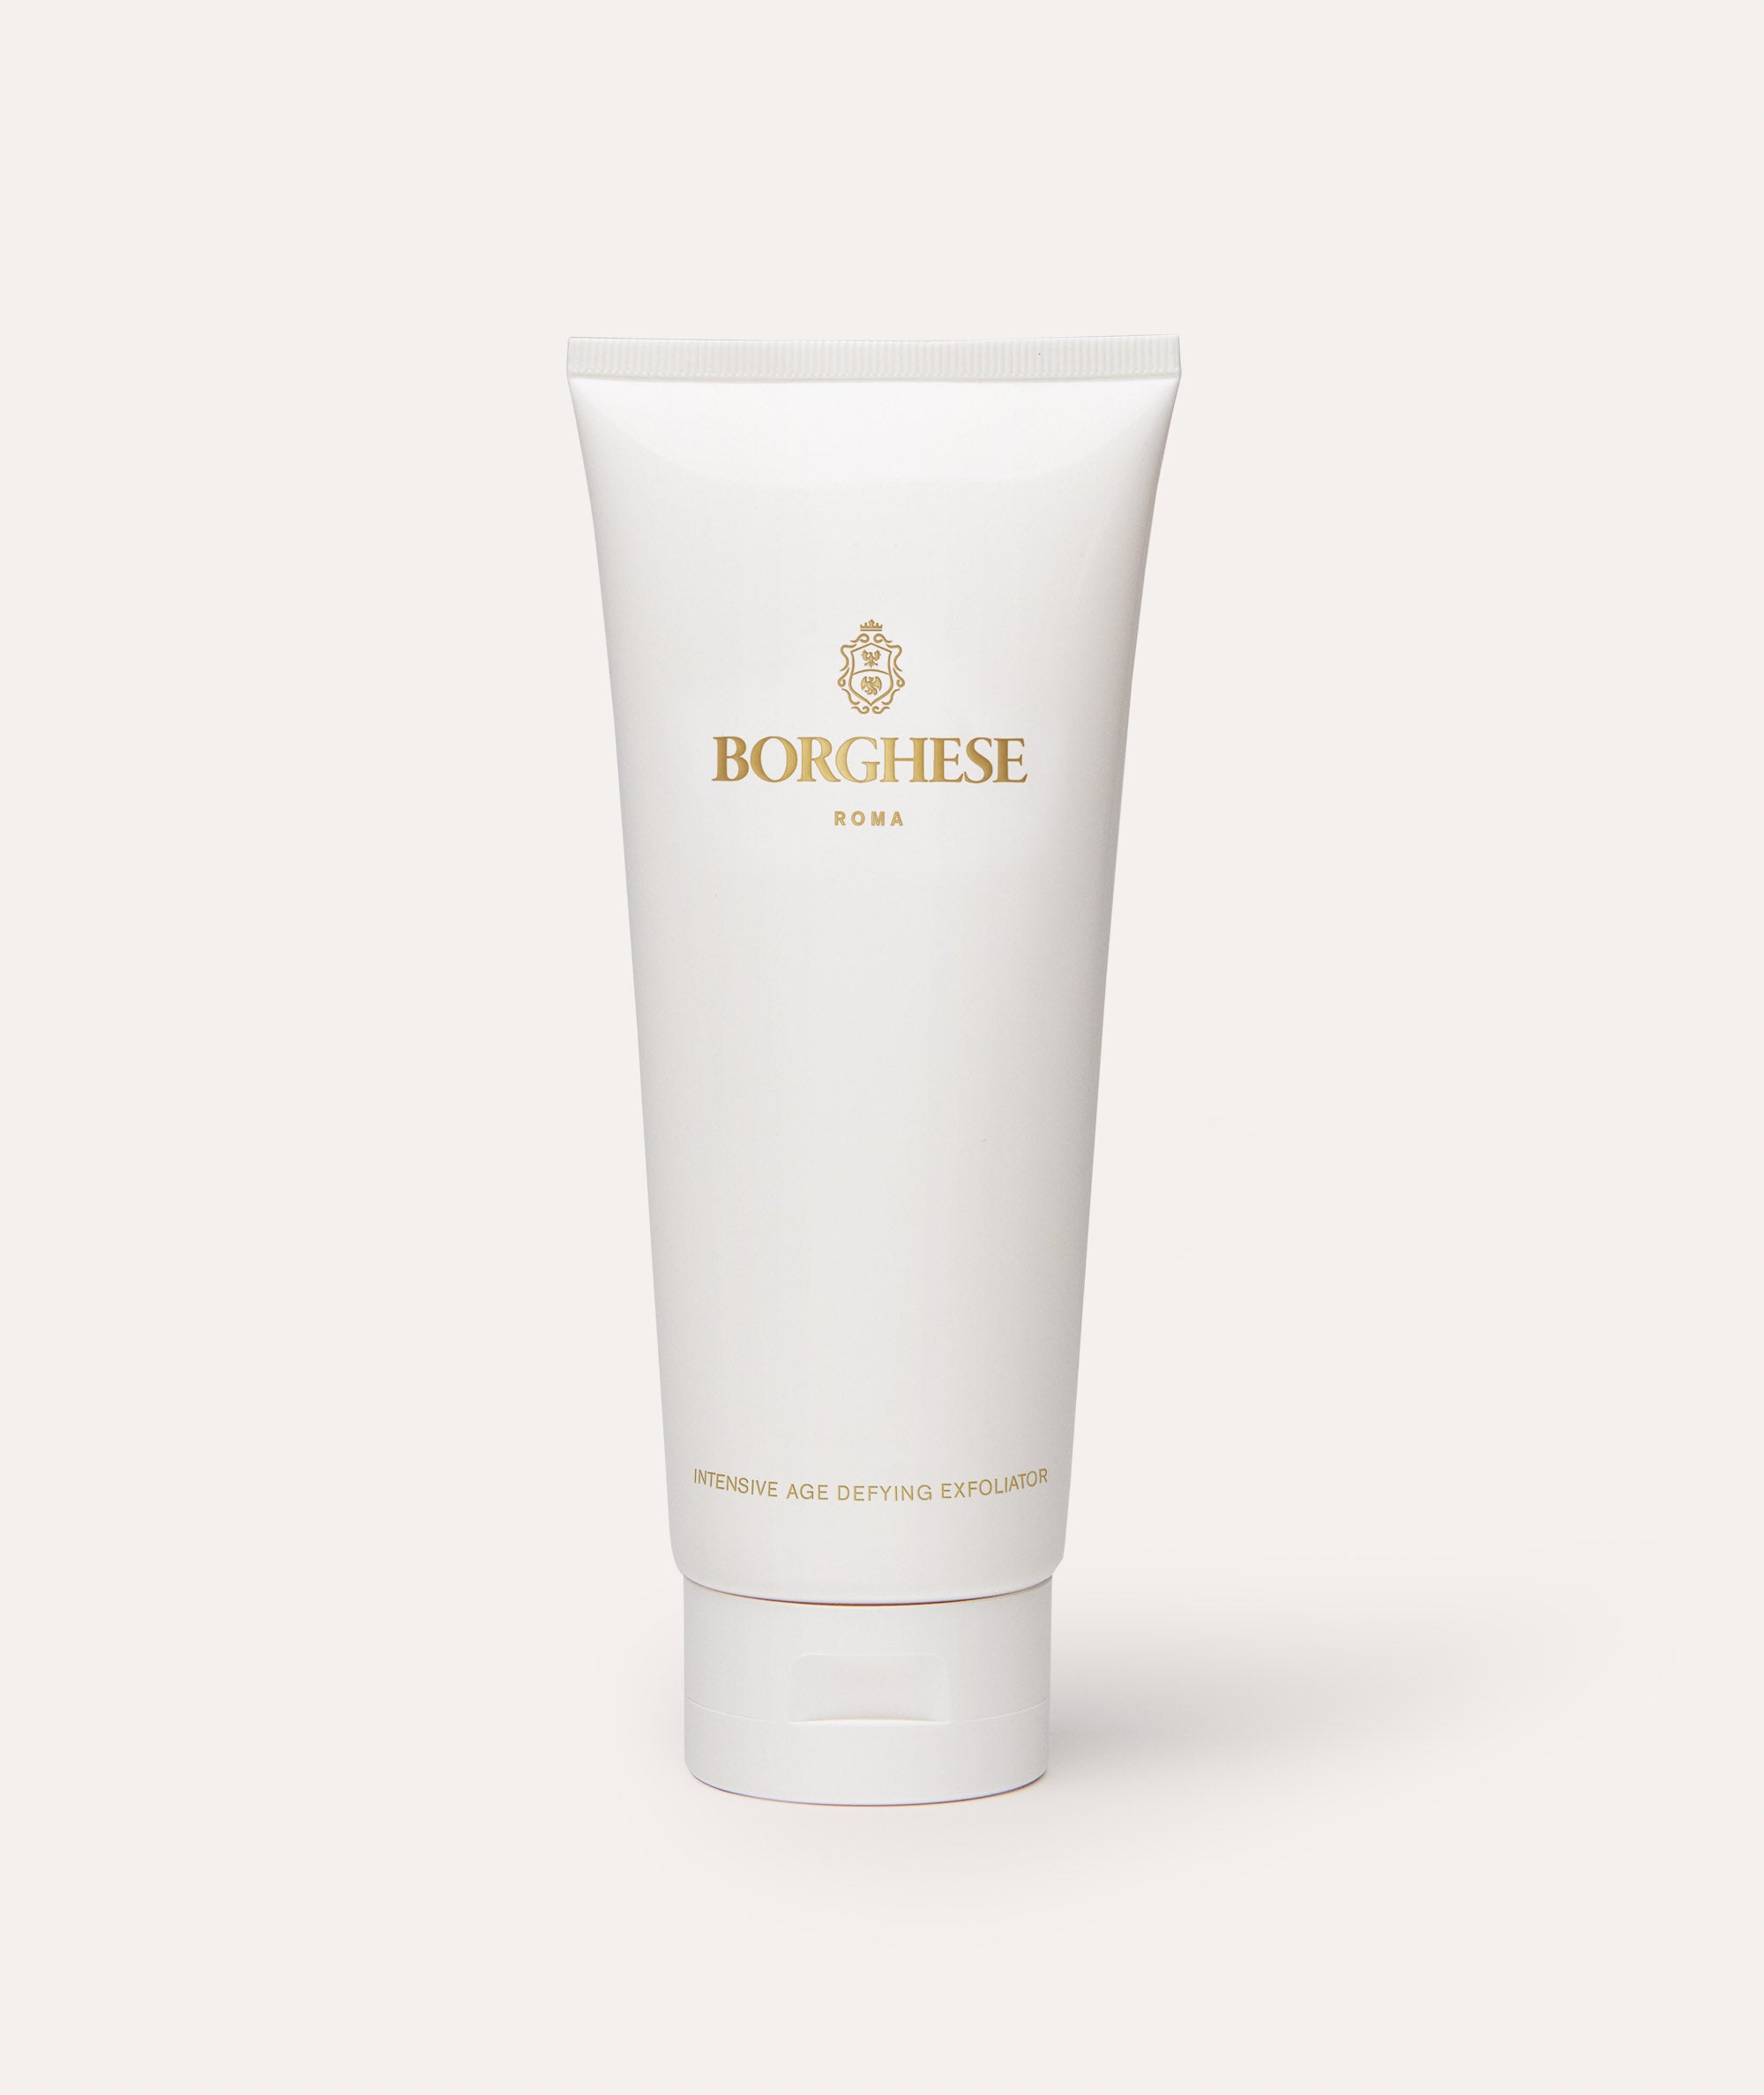 This is a picture of the Borghese Intensive Age Defying Exfoliator in a white tube